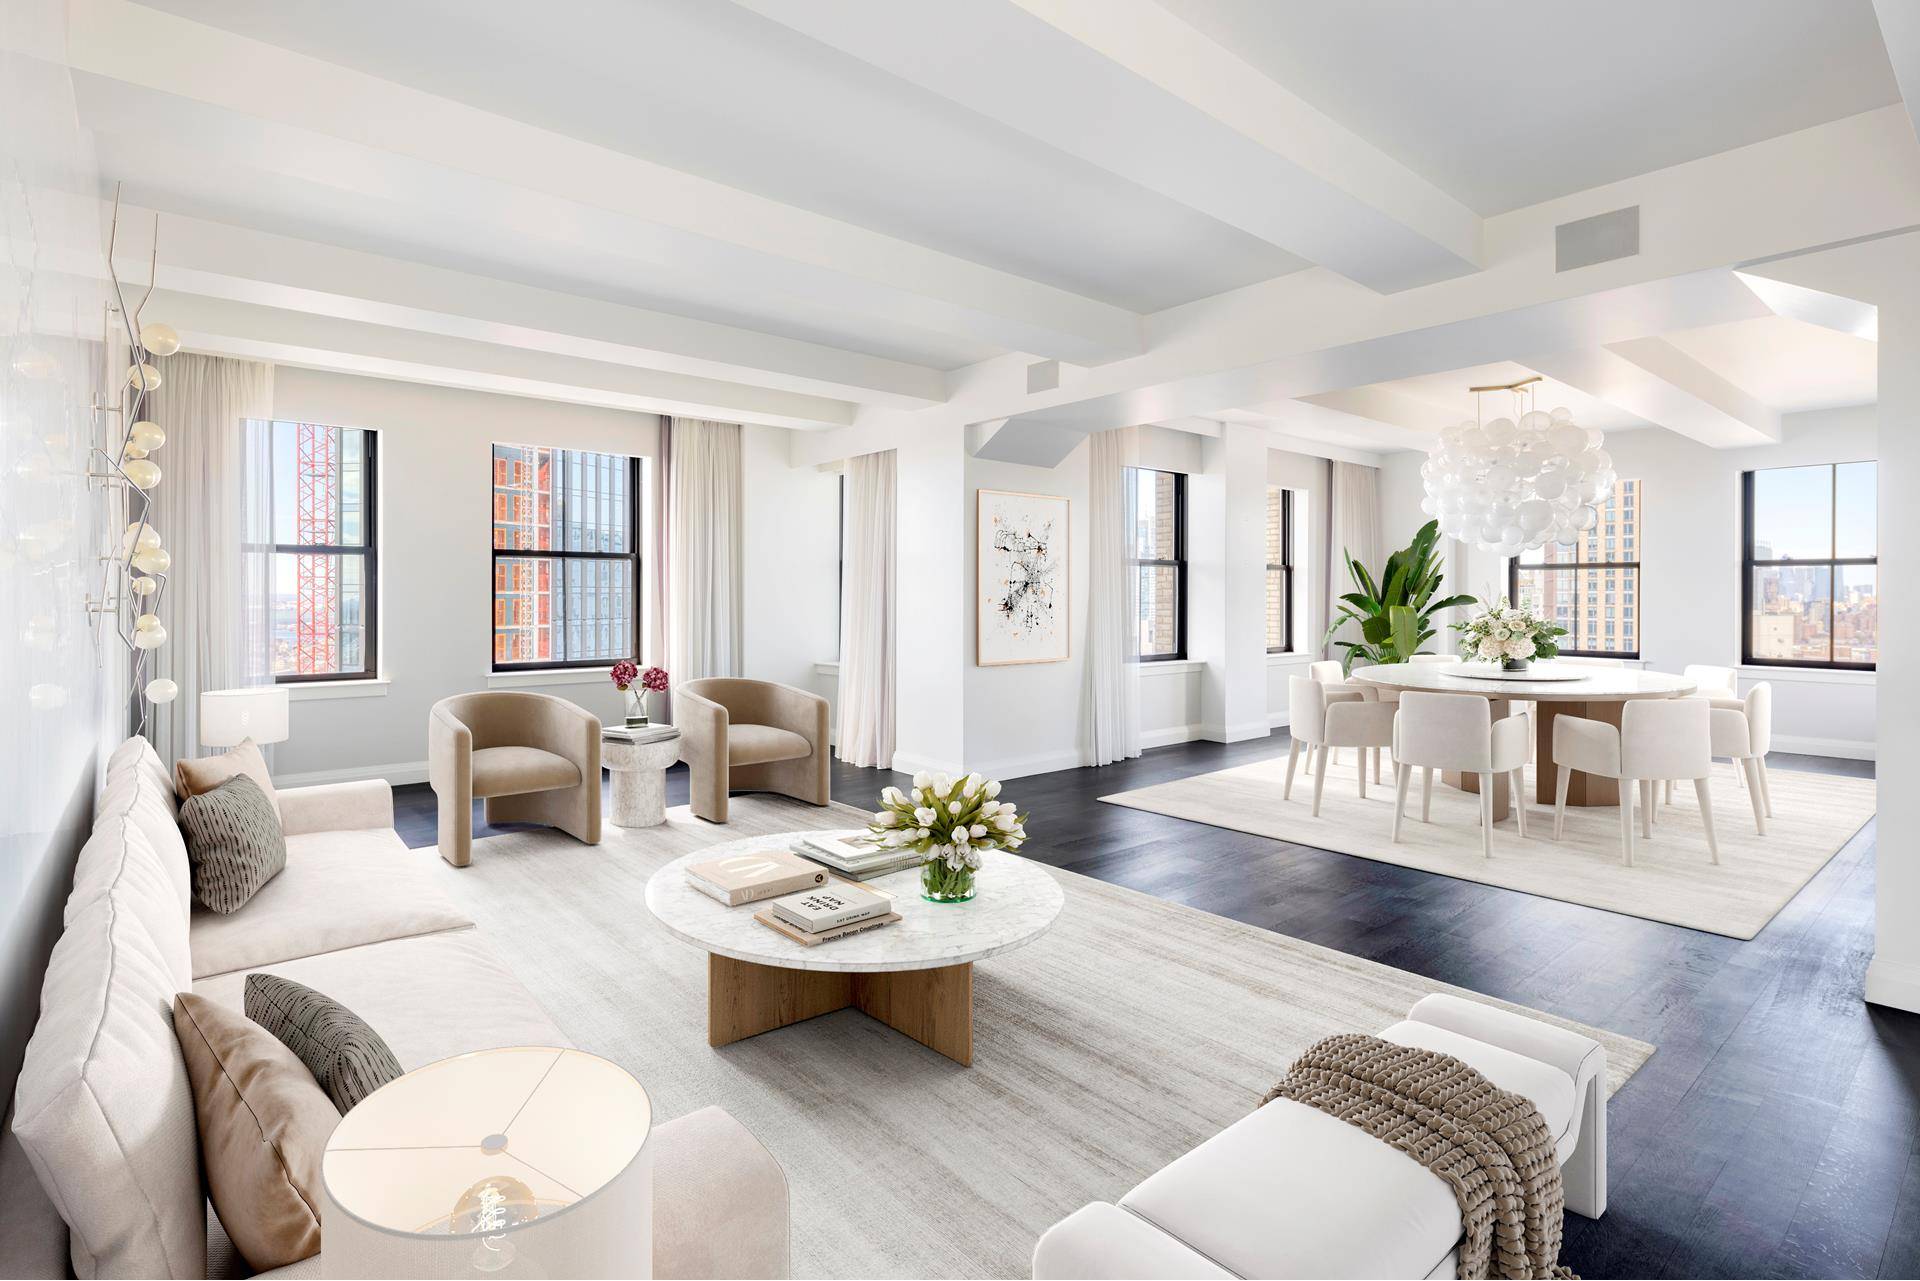 Featured in the December 2021 issue of architectural digest, this exceedingly rare, mesmerizing full floor penthouse at 1 Hanson Place offers an unparalleled combination of high end finishes, extraordinary interior ...